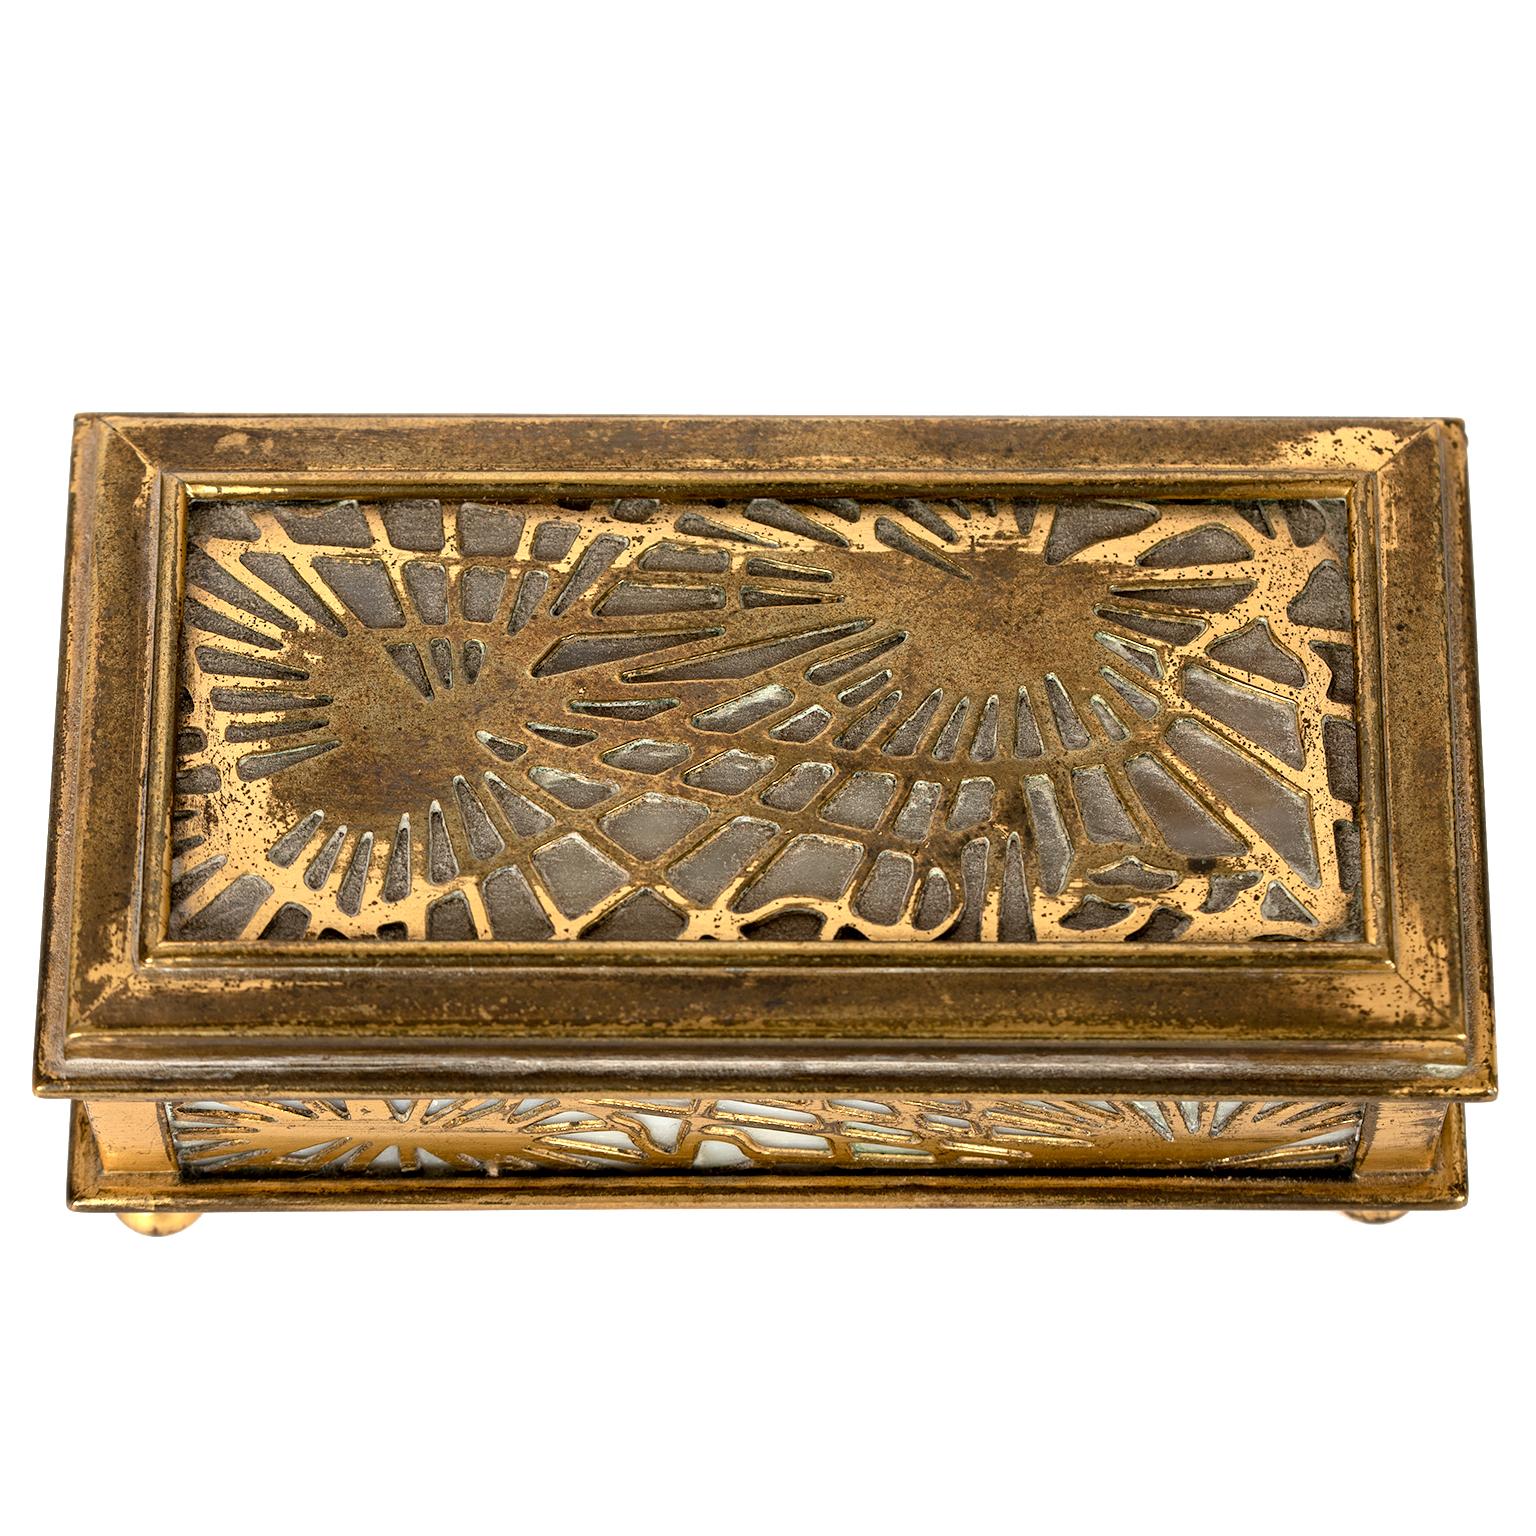 Tiffany Studios NY 801 Pine Needle Stamp Box In Good Condition For Sale In Toronto, ON